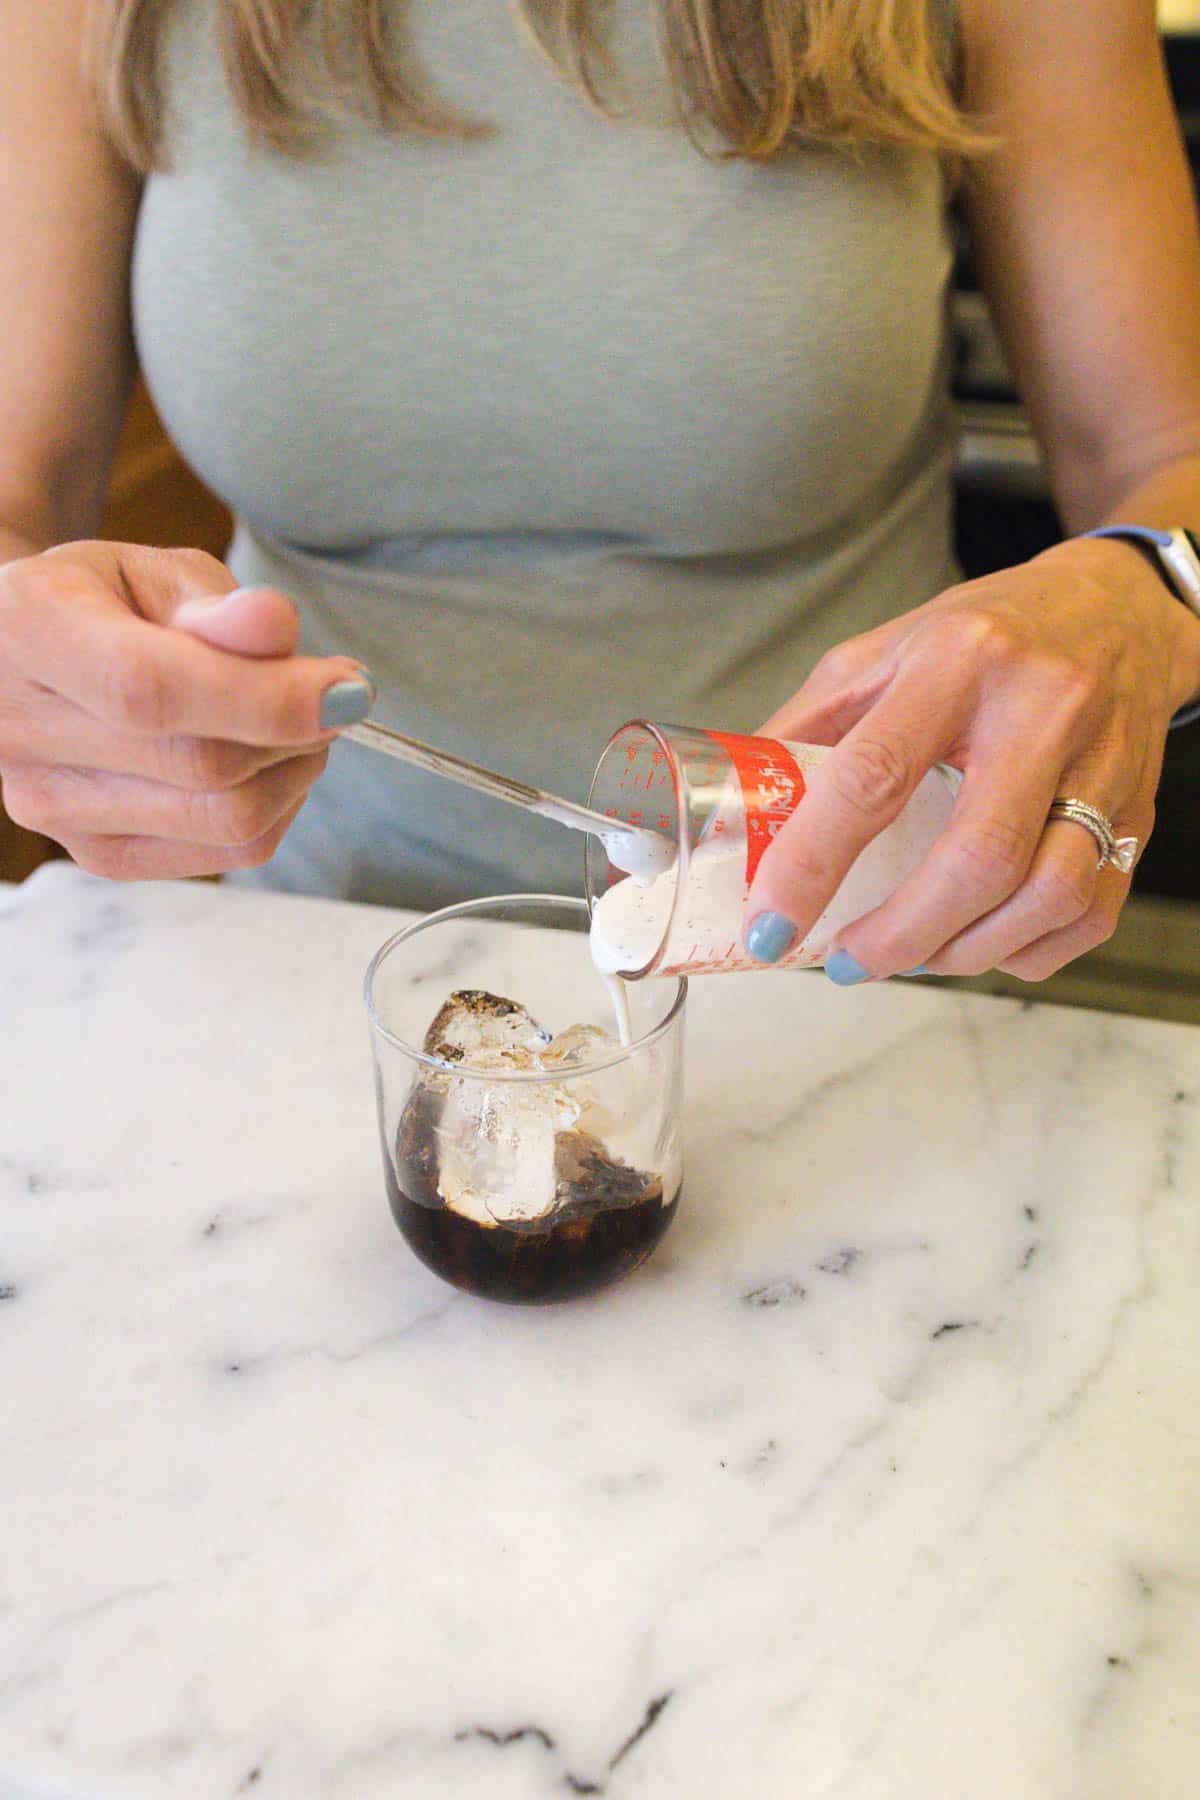 Woman pouring cream over a glass of Kahlua and ice.